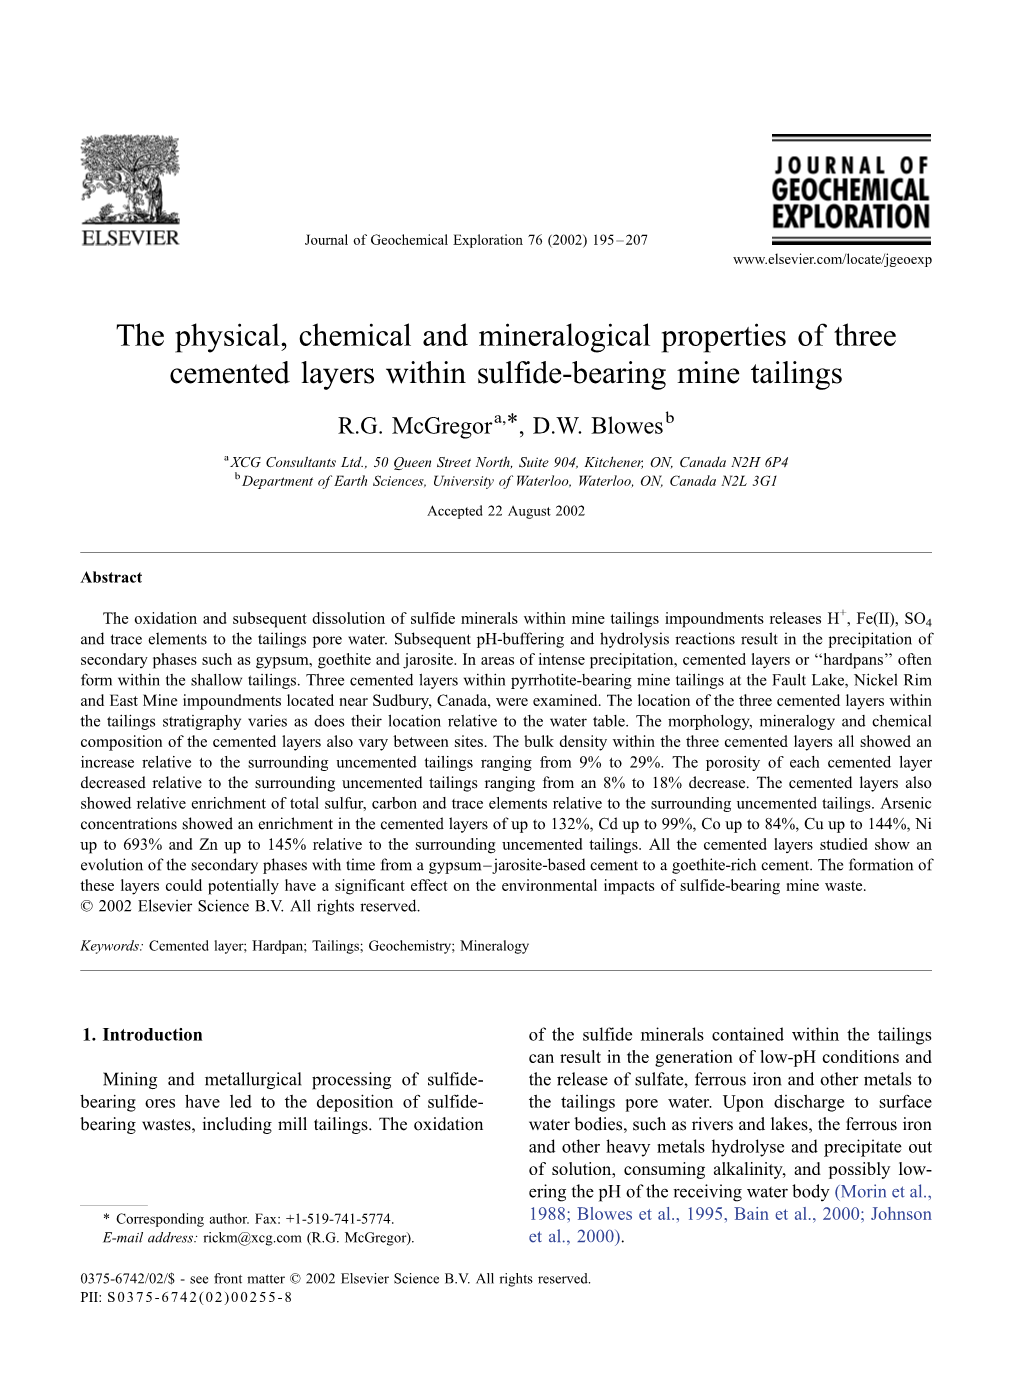 The Physical, Chemical and Mineralogical Properties of Three Cemented Layers Within Sulfide-Bearing Mine Tailings